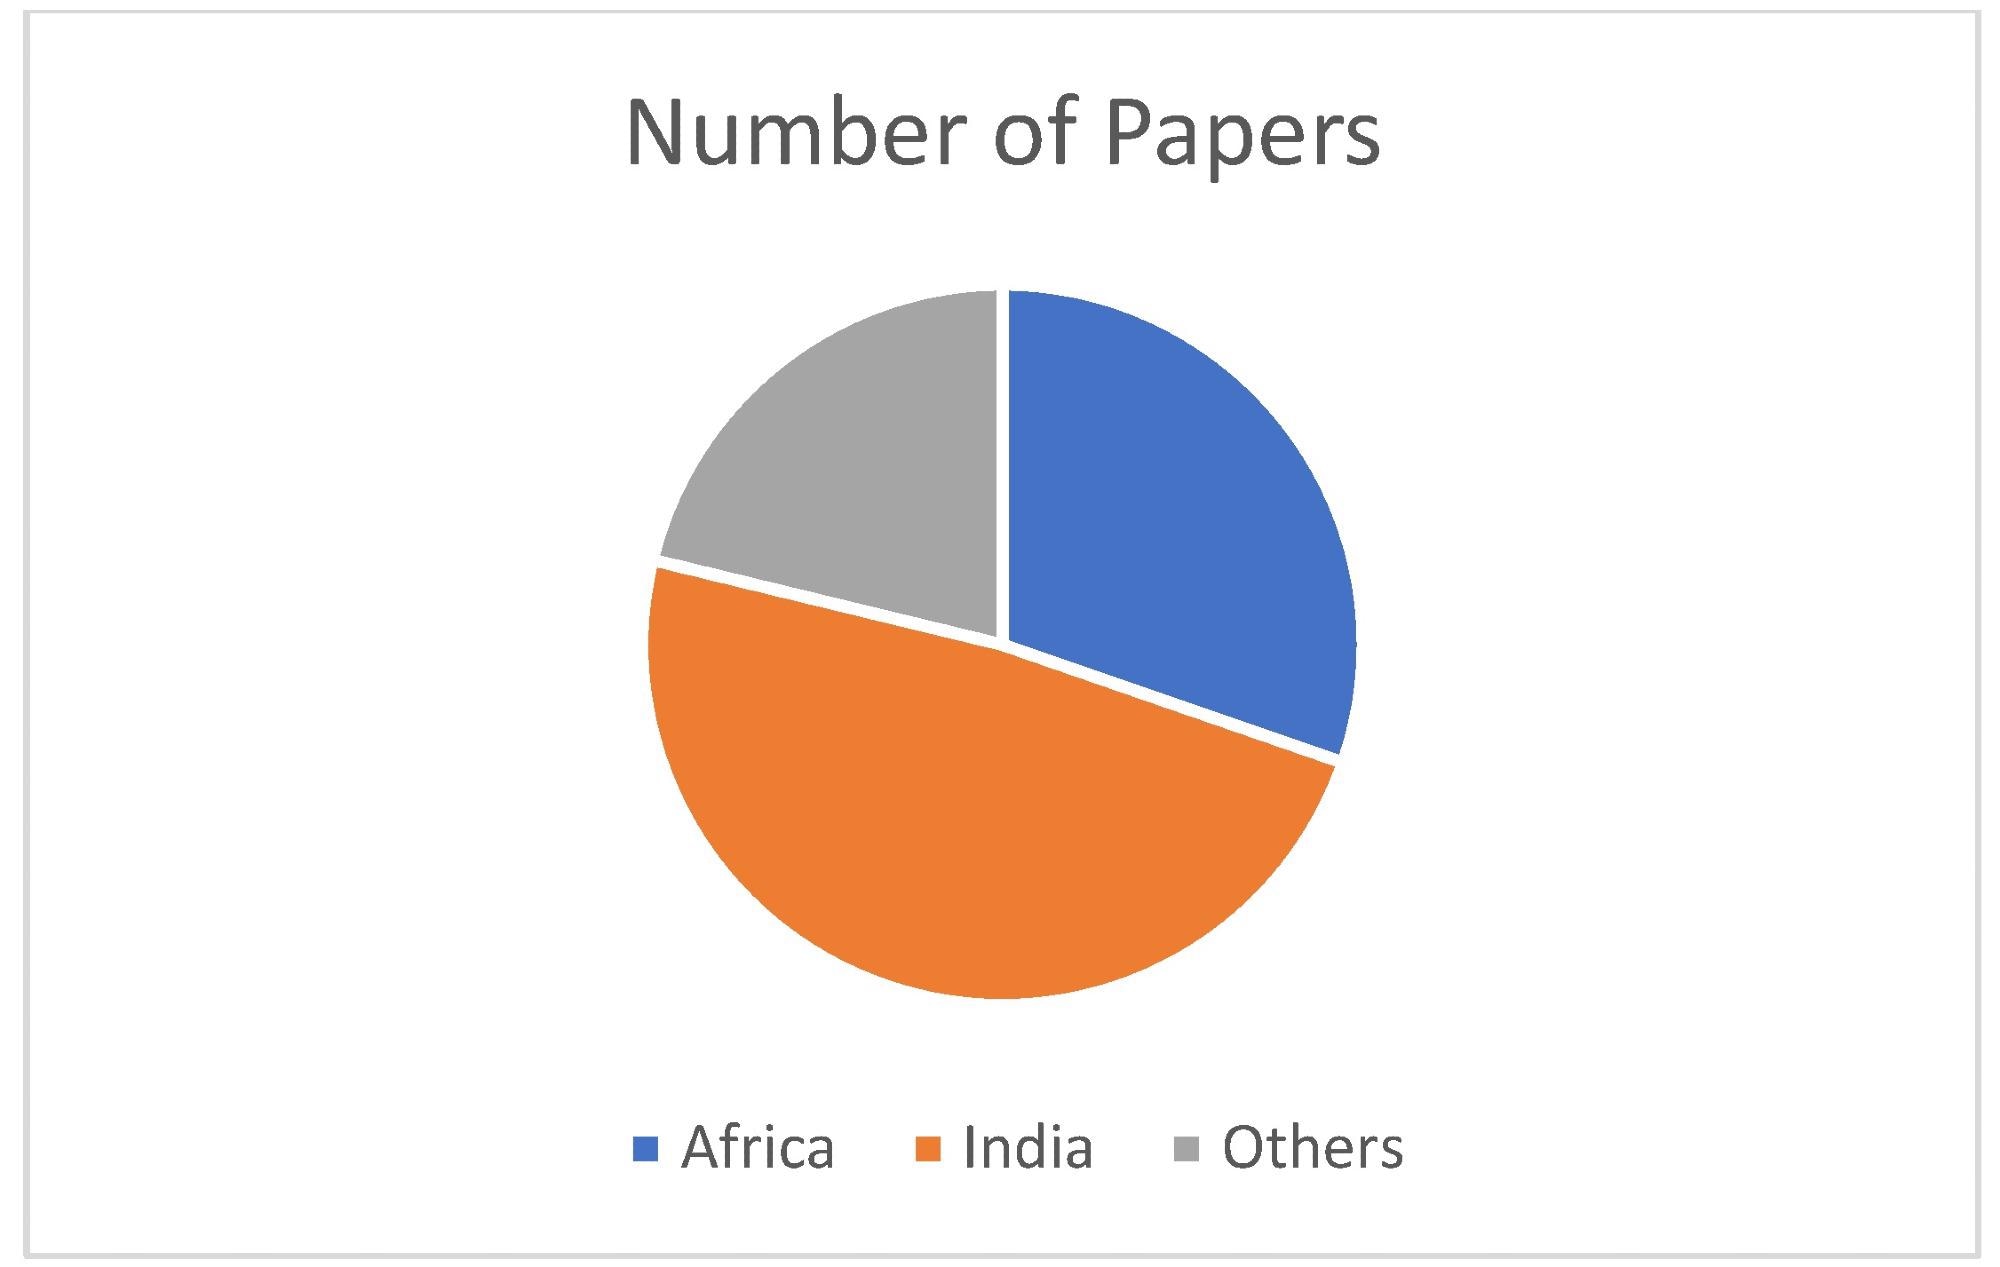 The proportion of studies from each country is used in this literature review.